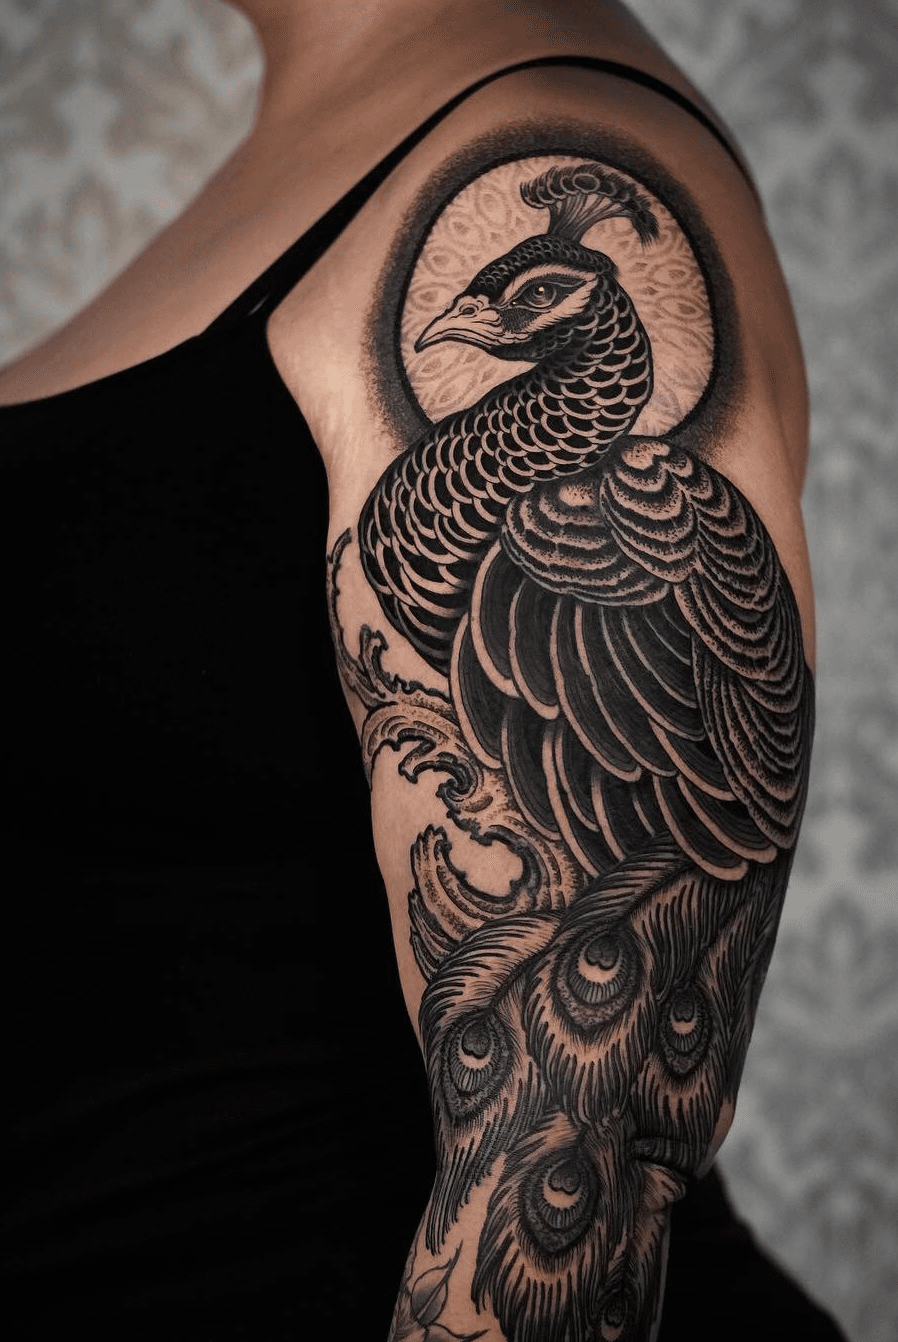 Get Inspired With These Vibrant Peacock Tattoo Ideas A Symbol Of Good Luck